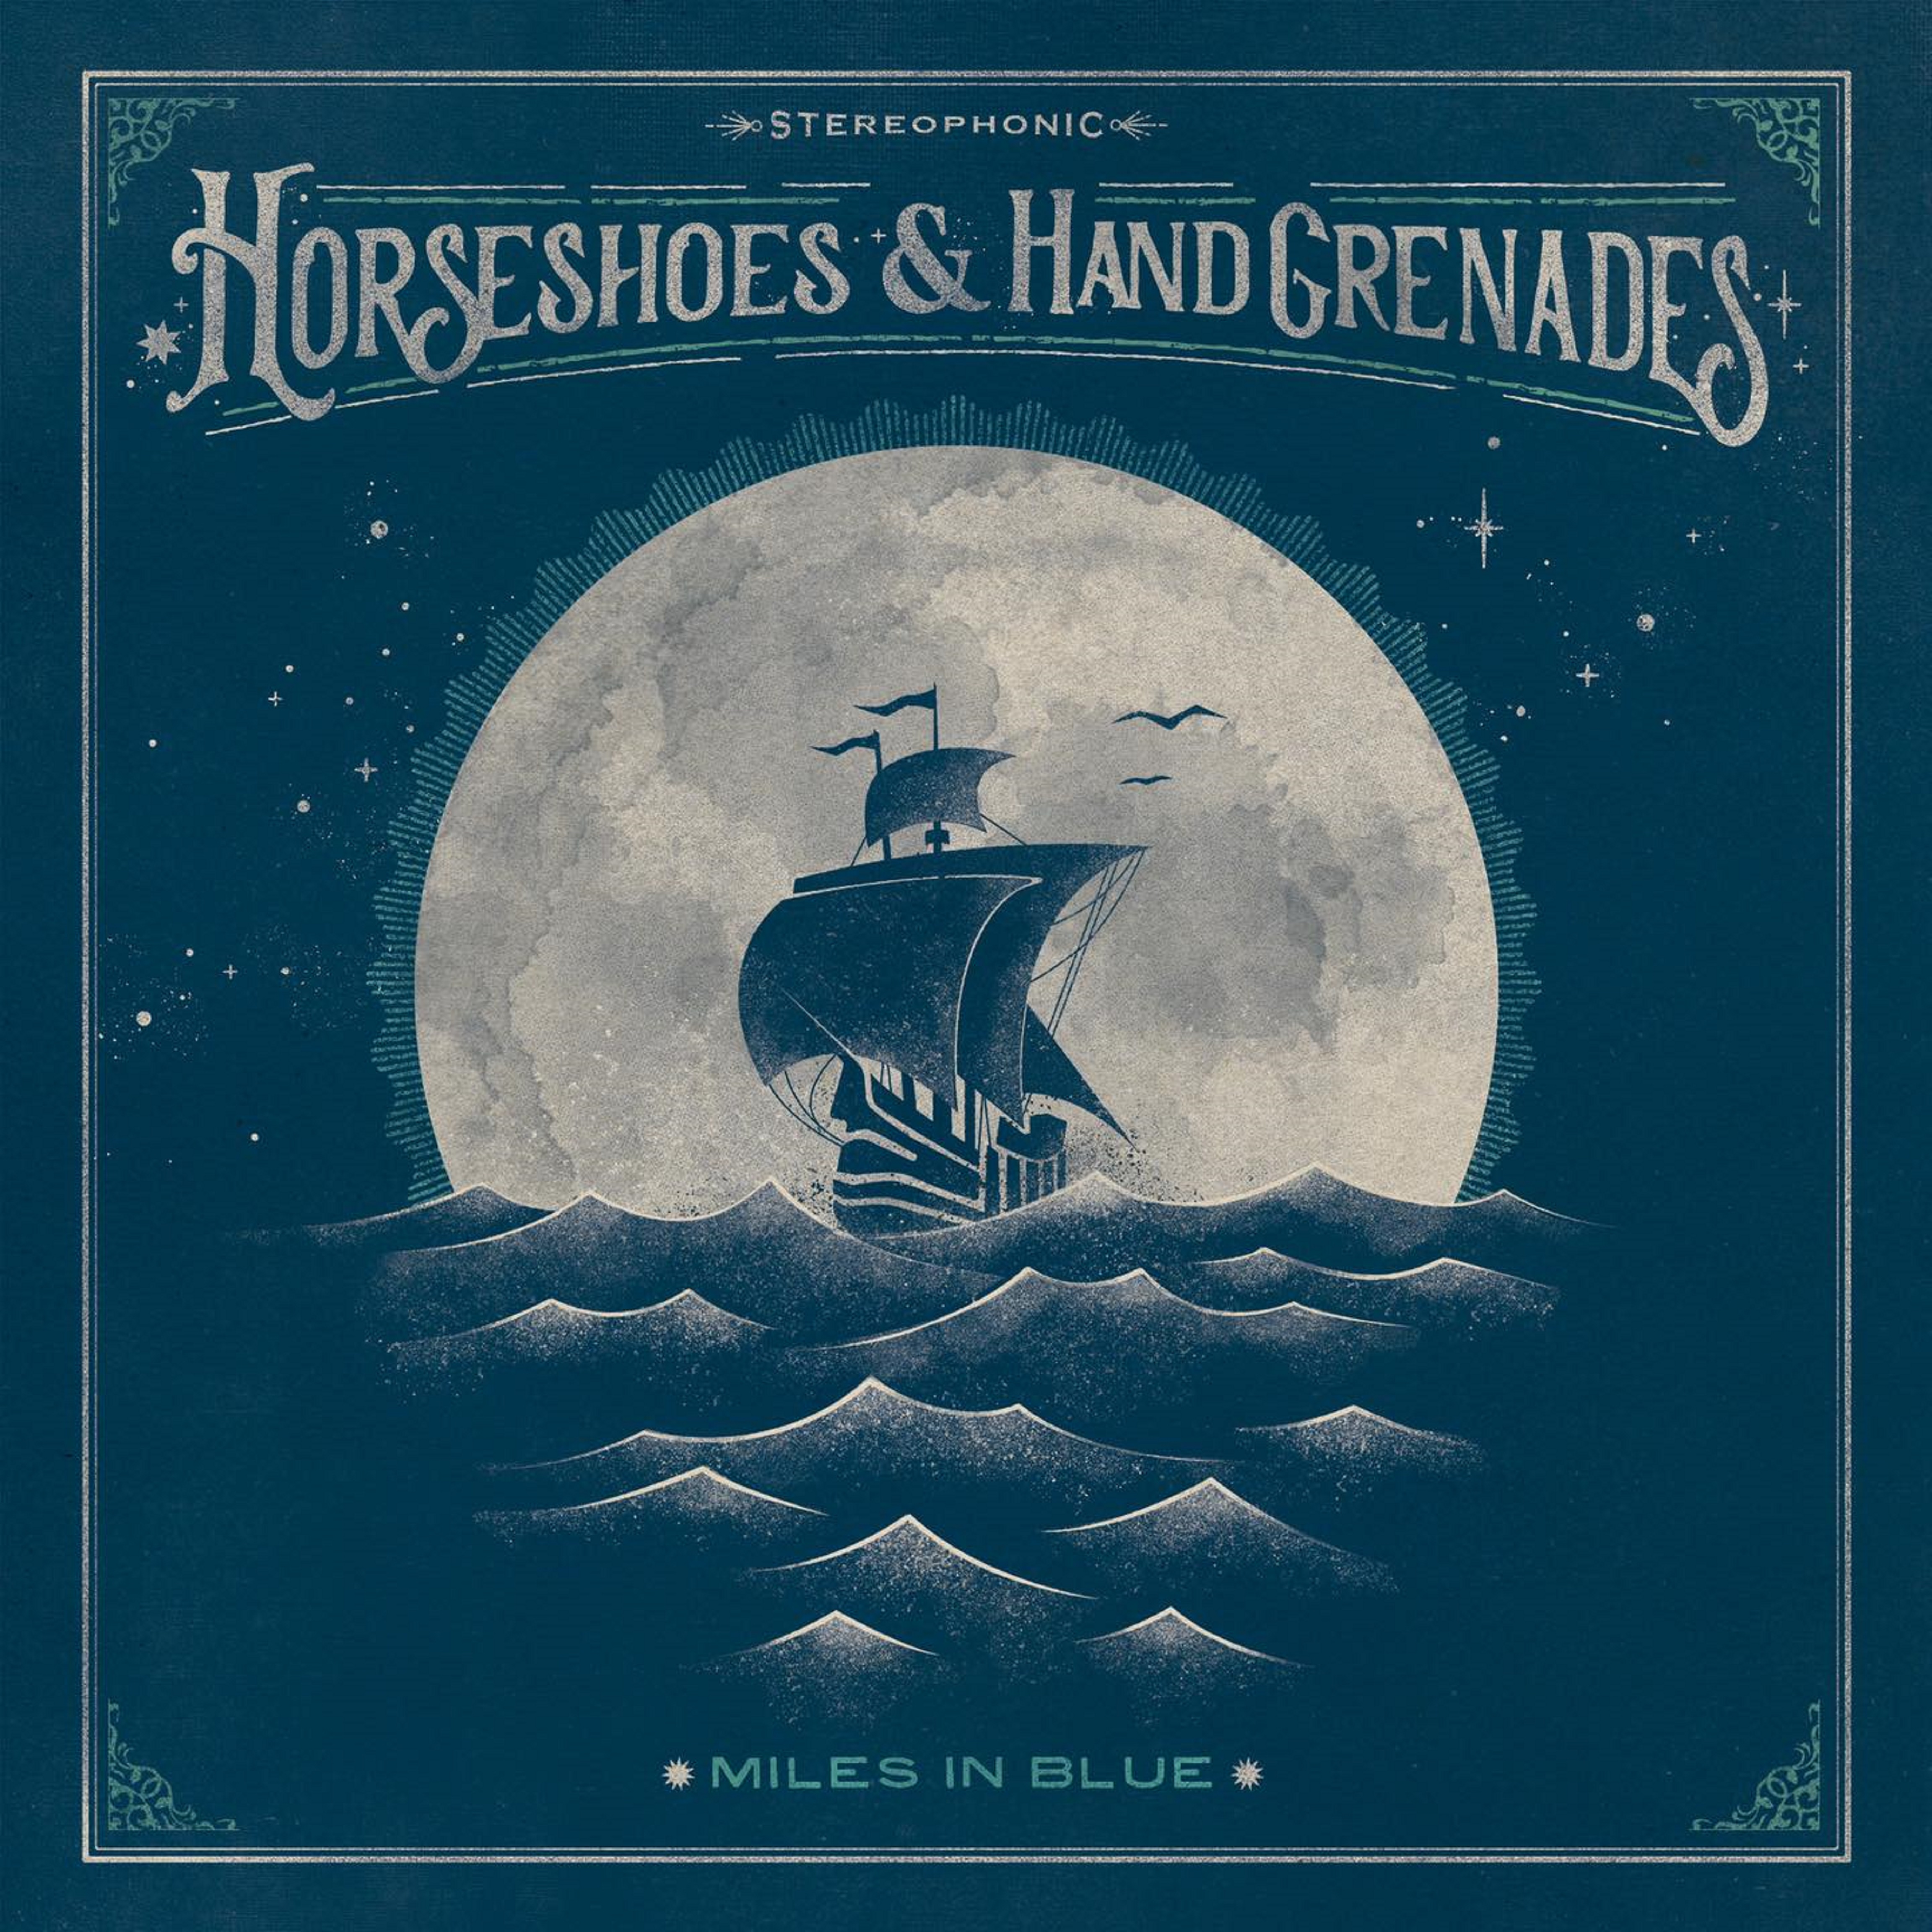 Horseshoes and Hand Grenades to Release 5th Album, Miles in Blue